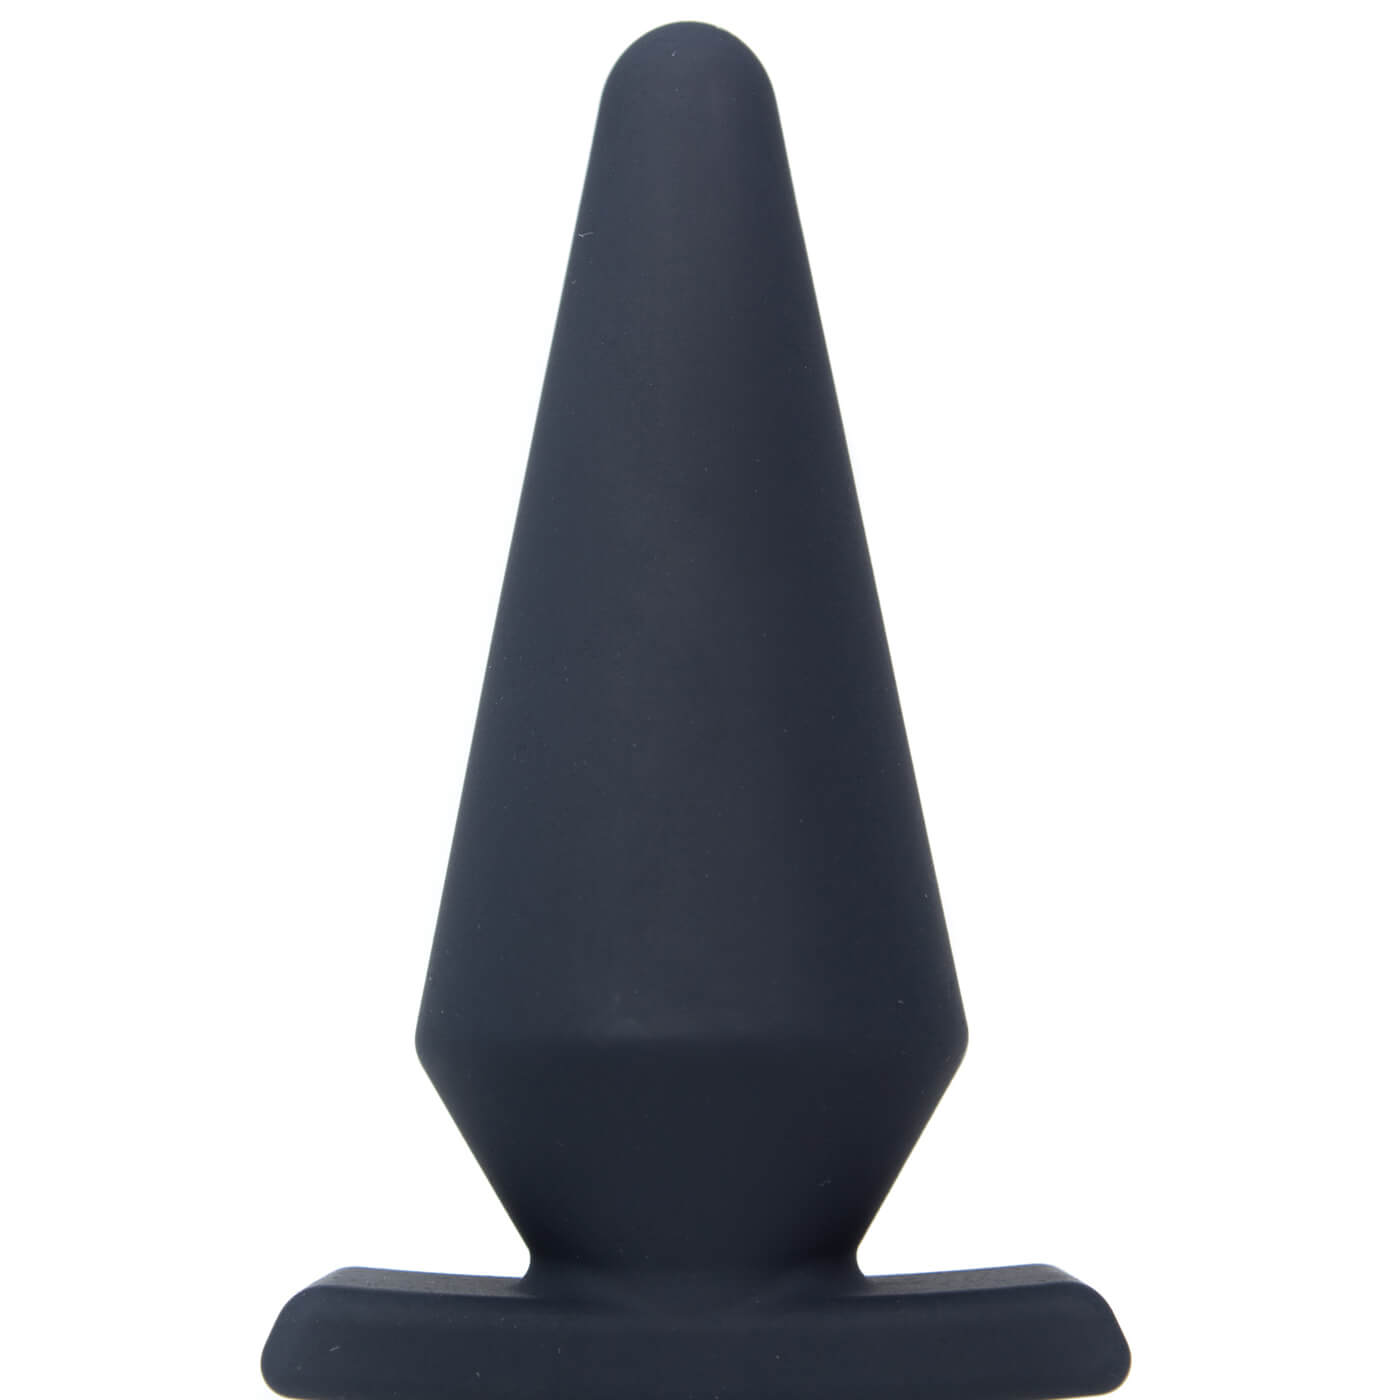 VeDO Rio GRANDE Ultra Quiet 12 Mode Large Powerful USB Anal Vibe